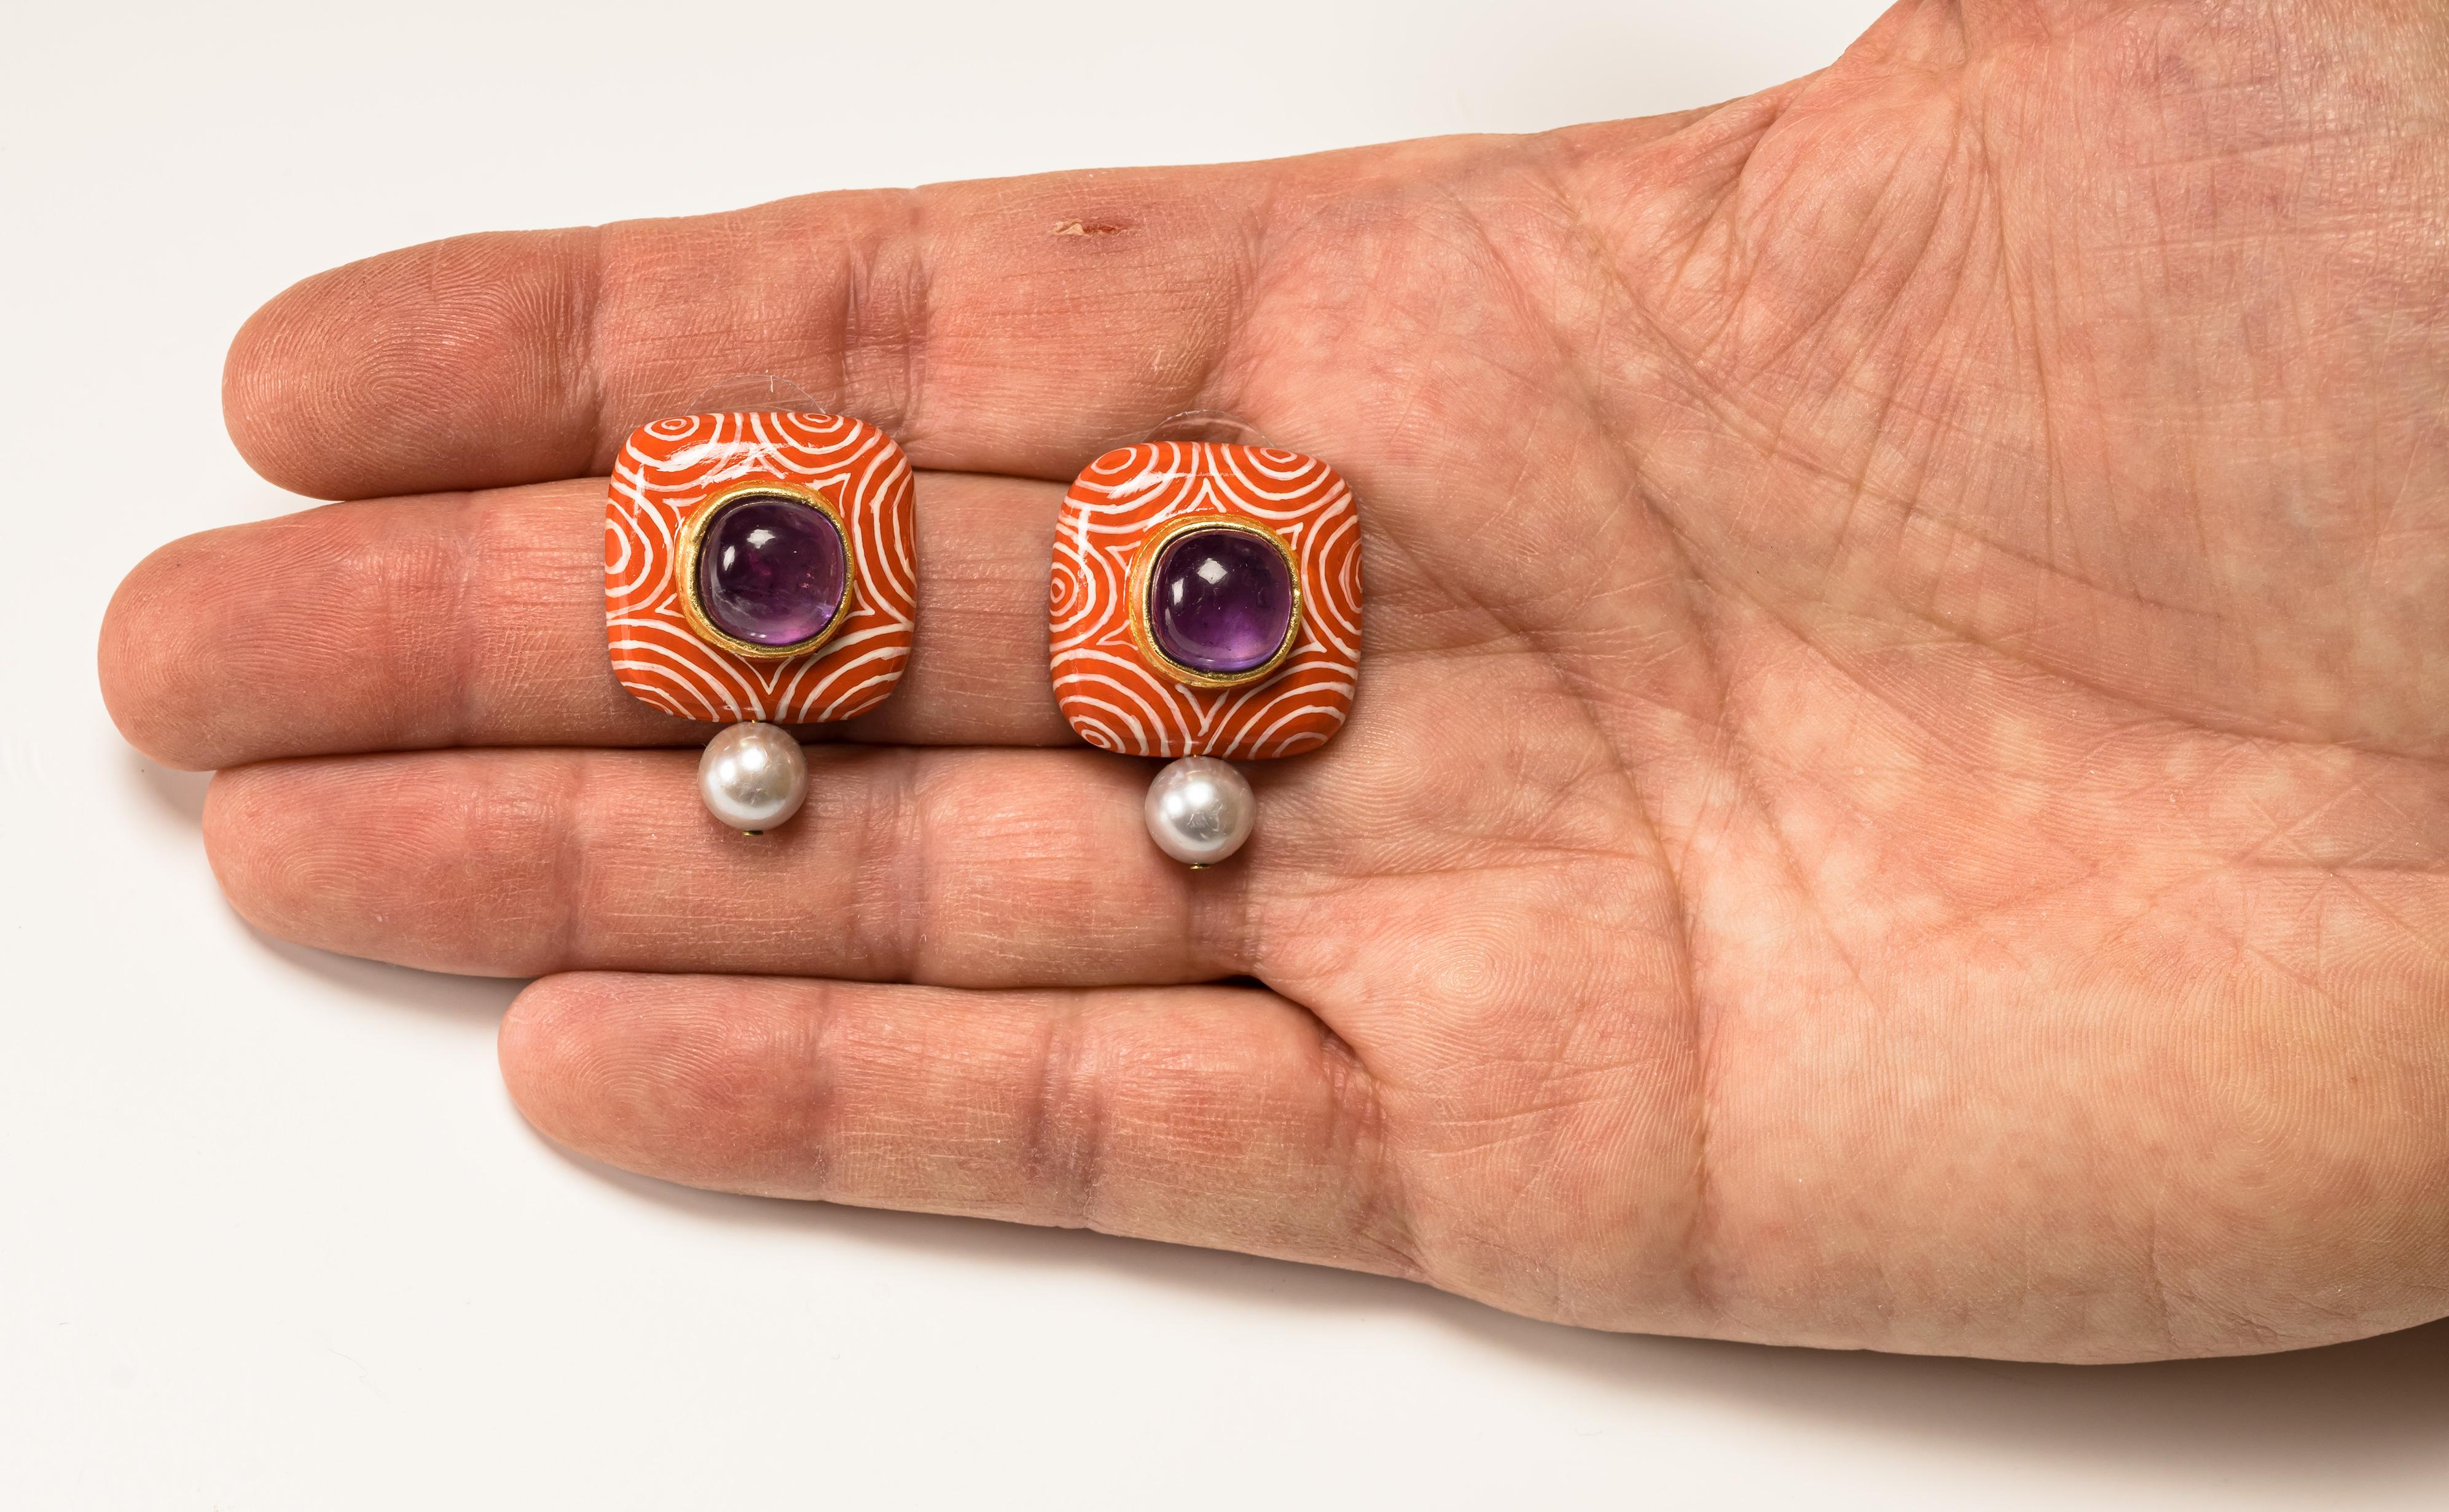 Earrings “ Hypno 3”, 2020, are a limited edition contemporary author jewelry by italian artist Gian Luca Bartellone.
Materials: papier-mâché, silver, amethysts, pearls, gold leaf 22kt.
(new version)

The main body is made of papier-mâché and hand